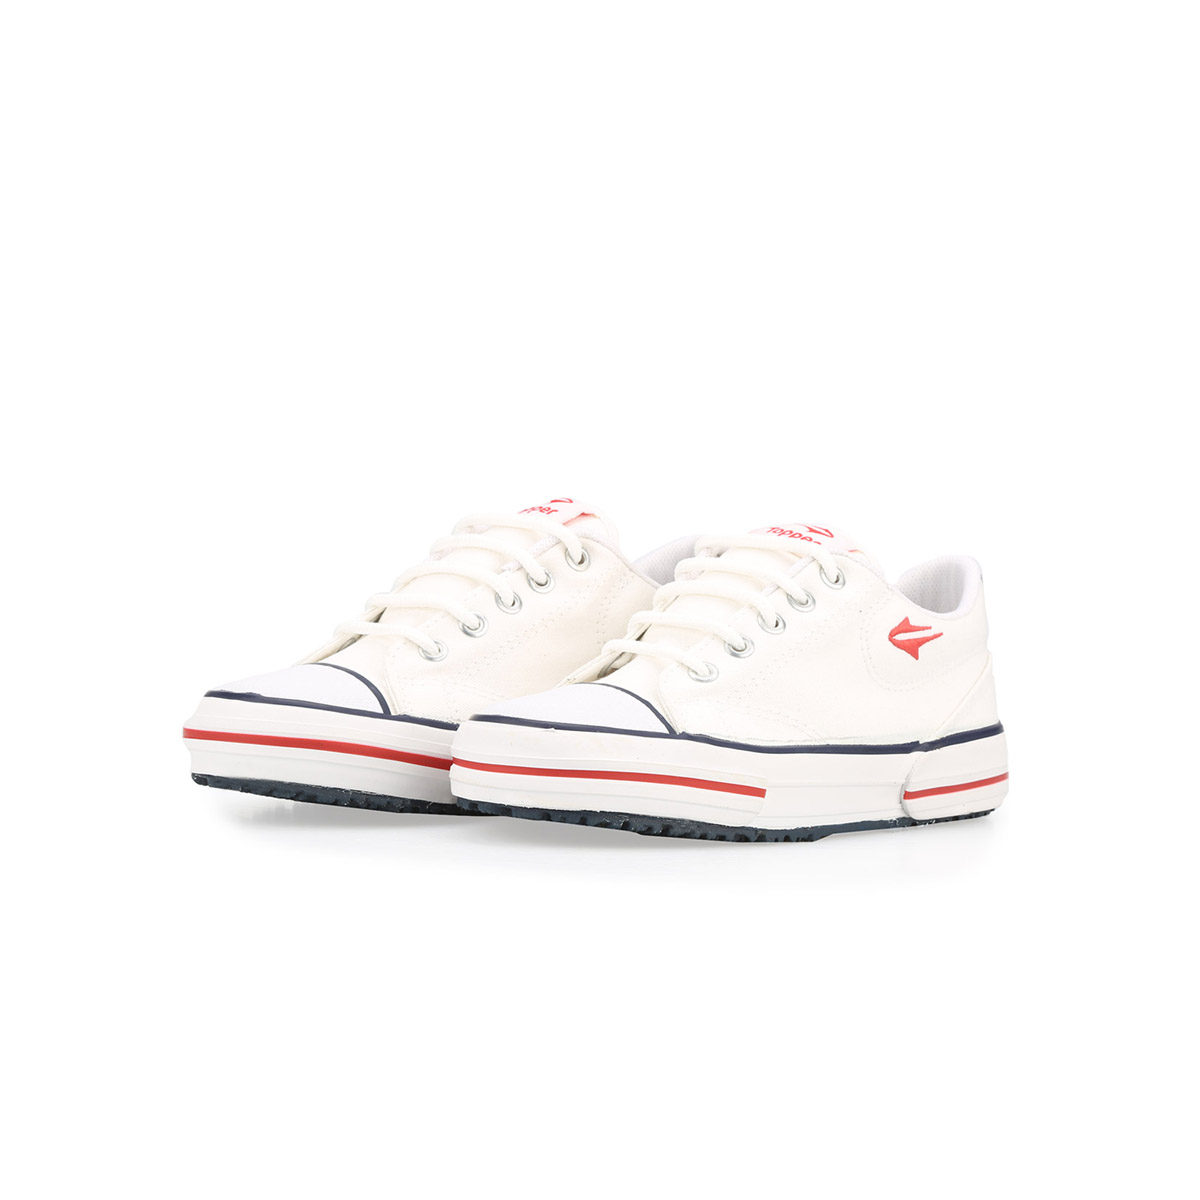 Zapatillas Topper Nova Low,  image number null